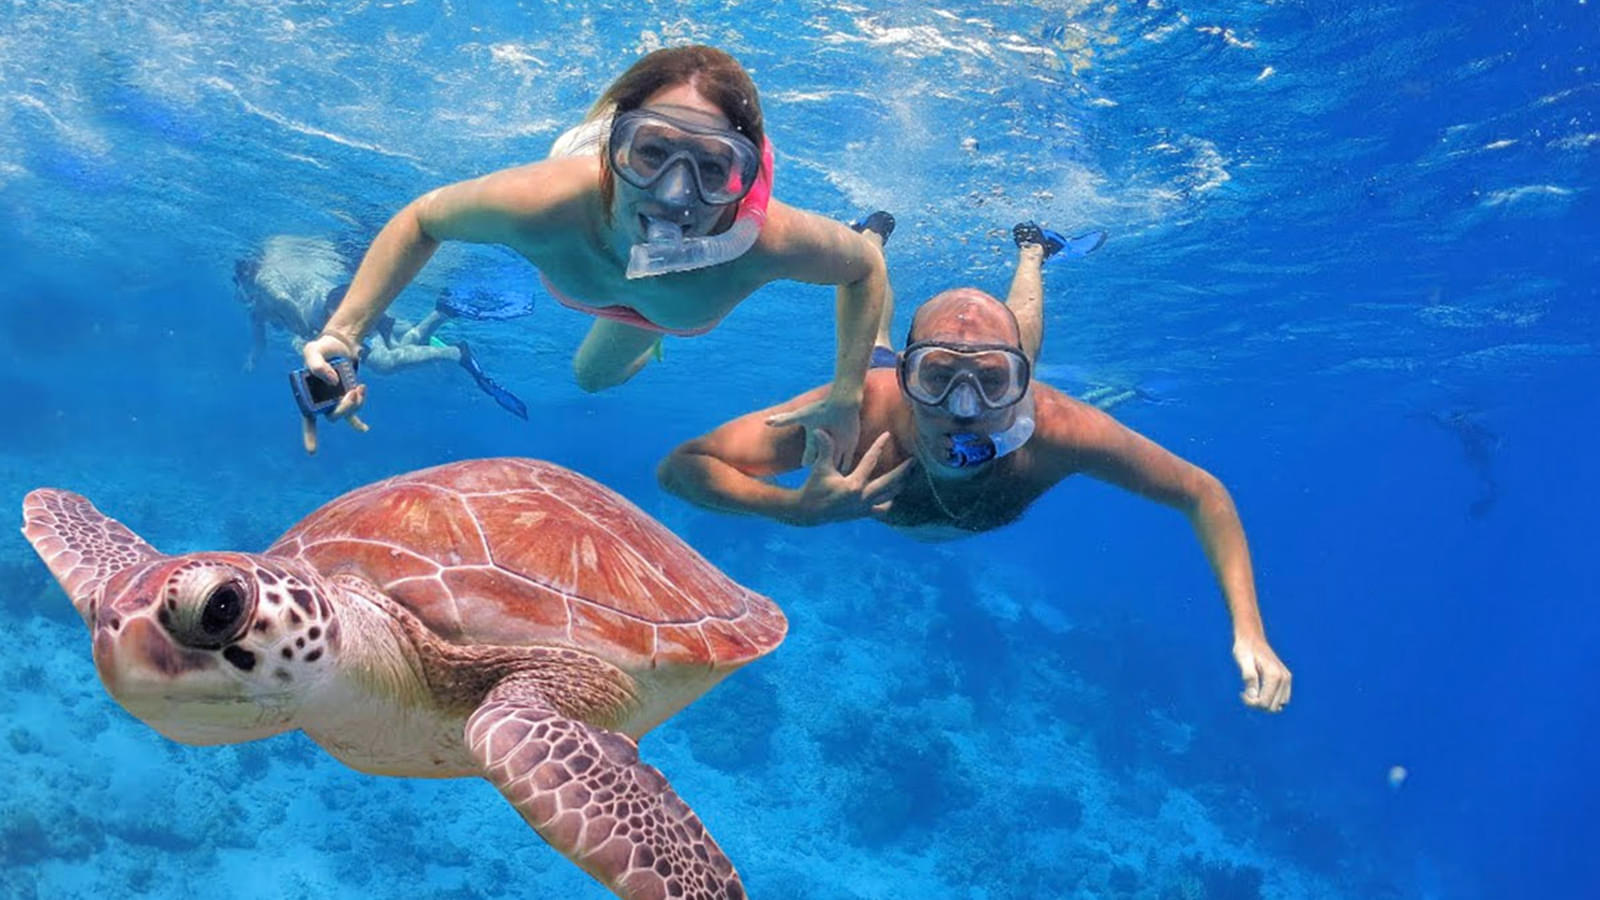 Make memories underwater with your companions